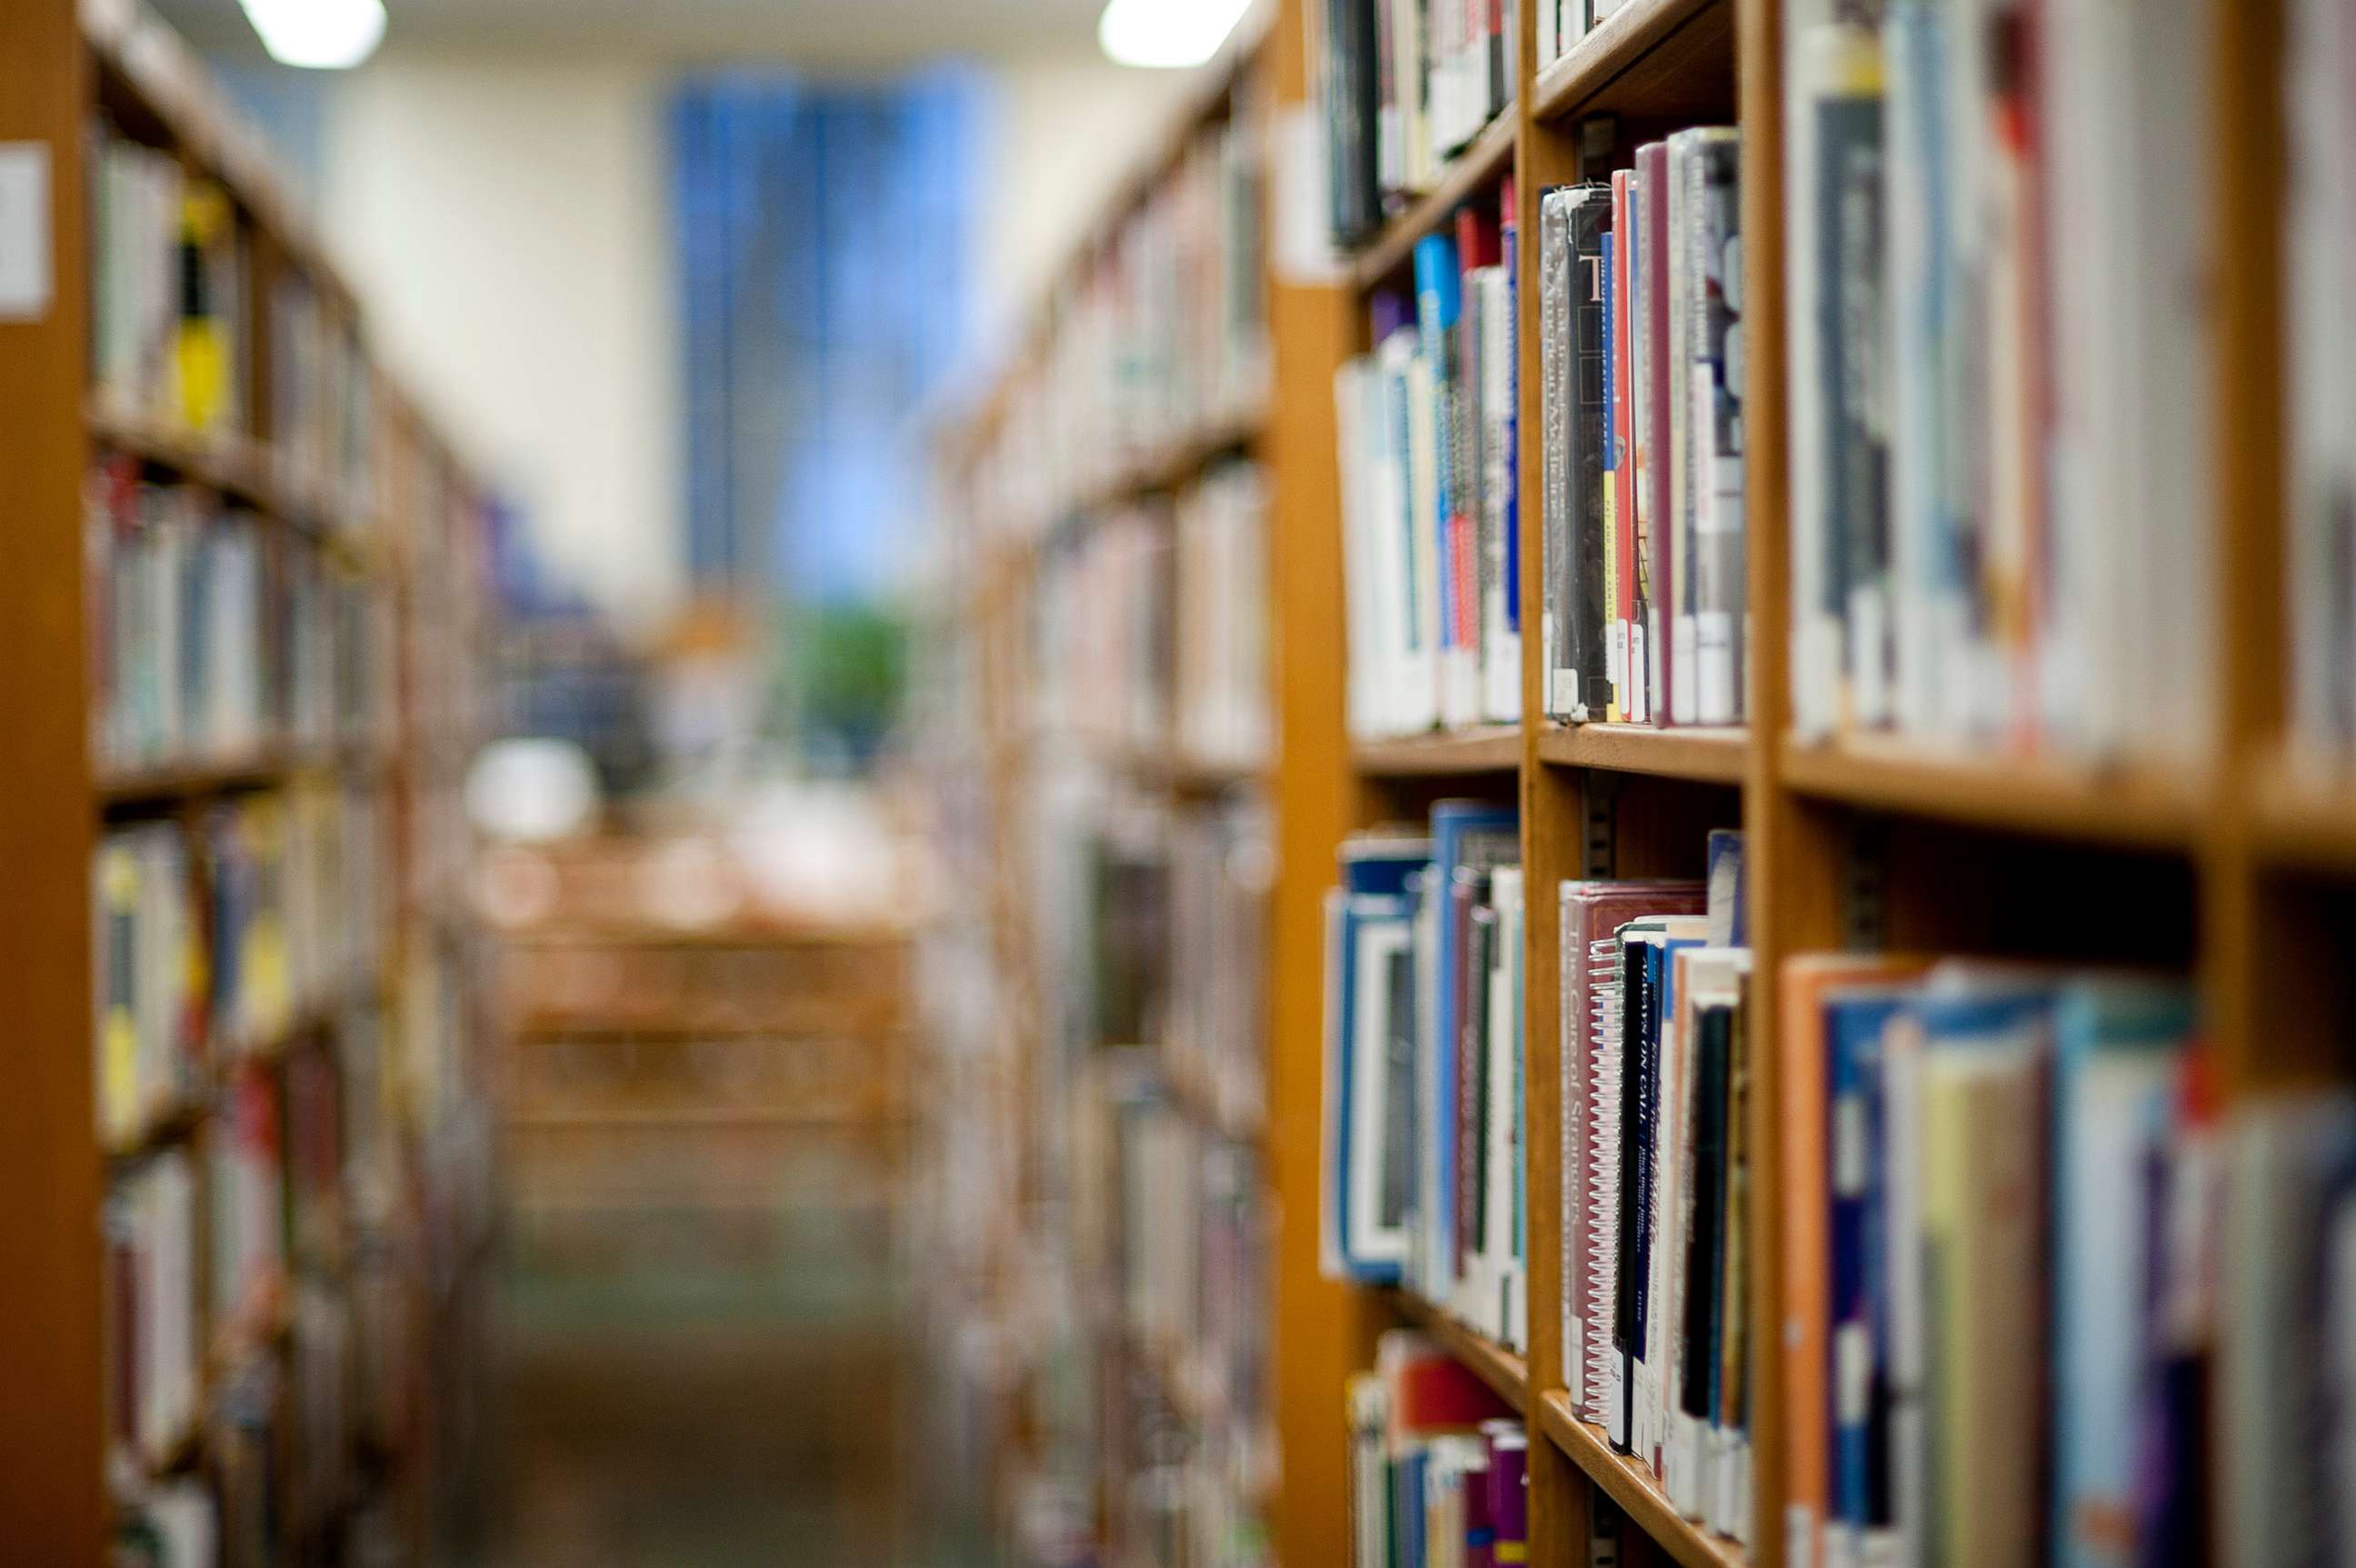 PHOTO: Books on shelf in library in a stock photo.